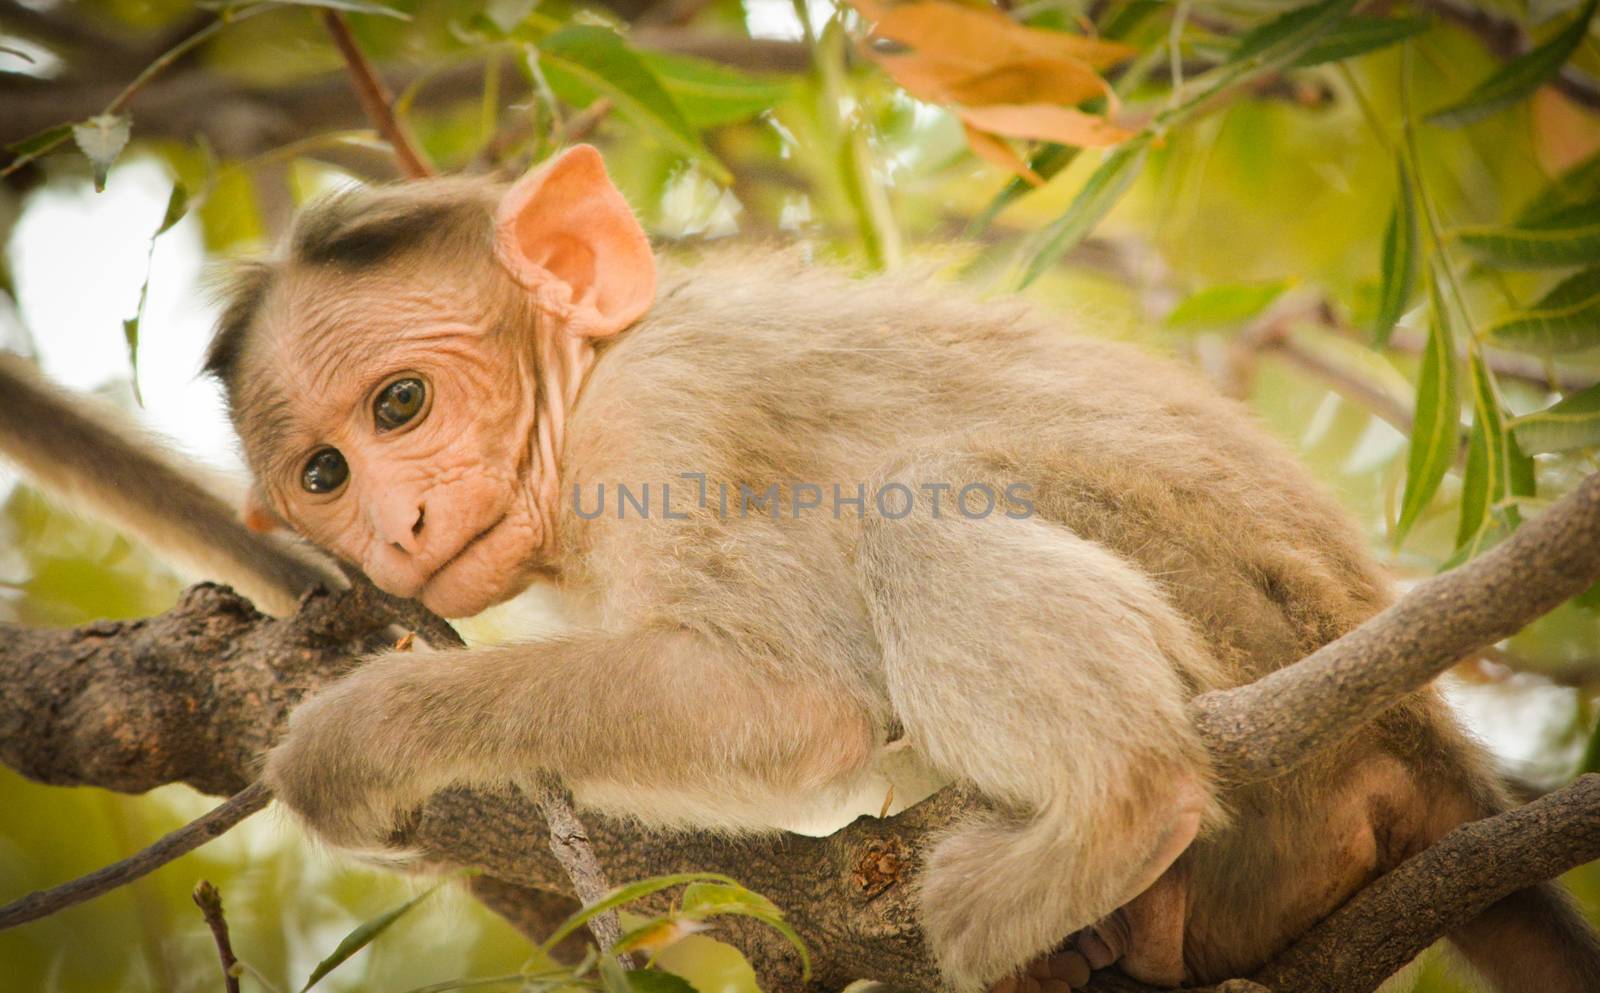 Close up of Bonnet Macaque Indian baby monkey sitting and playing with green trees and leaves on the background